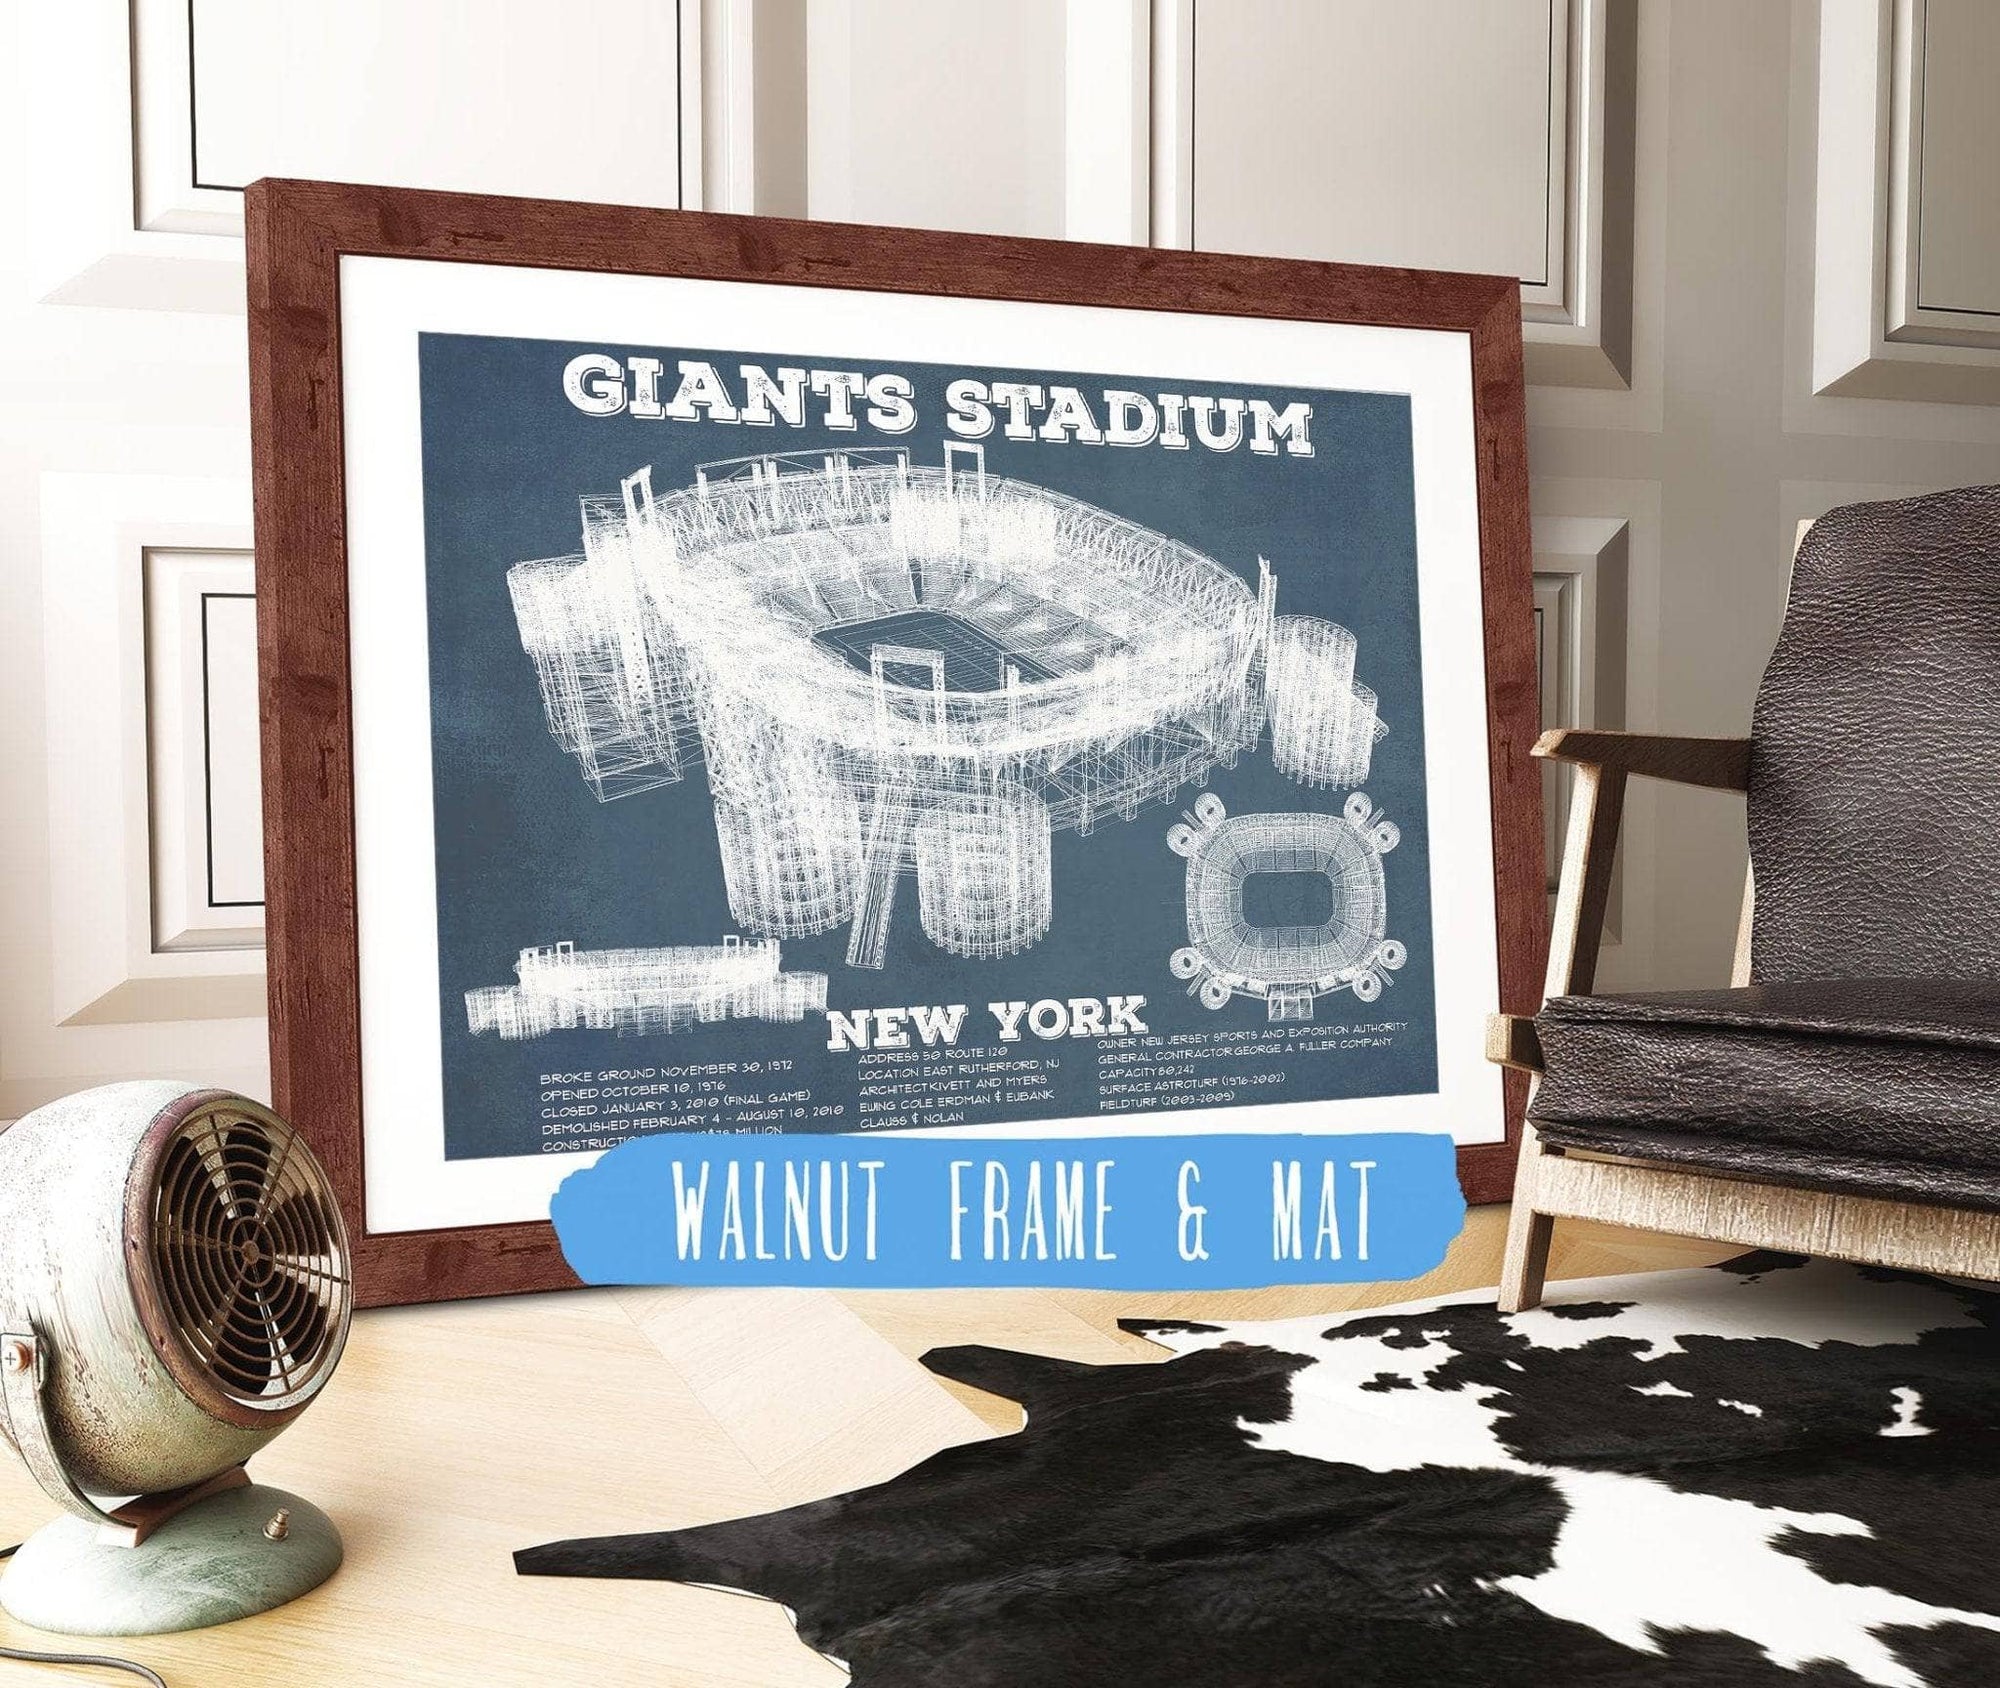 Cutler West Pro Football Collection 14" x 11" / Walnut Frame & Mat Giants Stadium - The Meadowlands New York Vintage Print 731428206-TOP